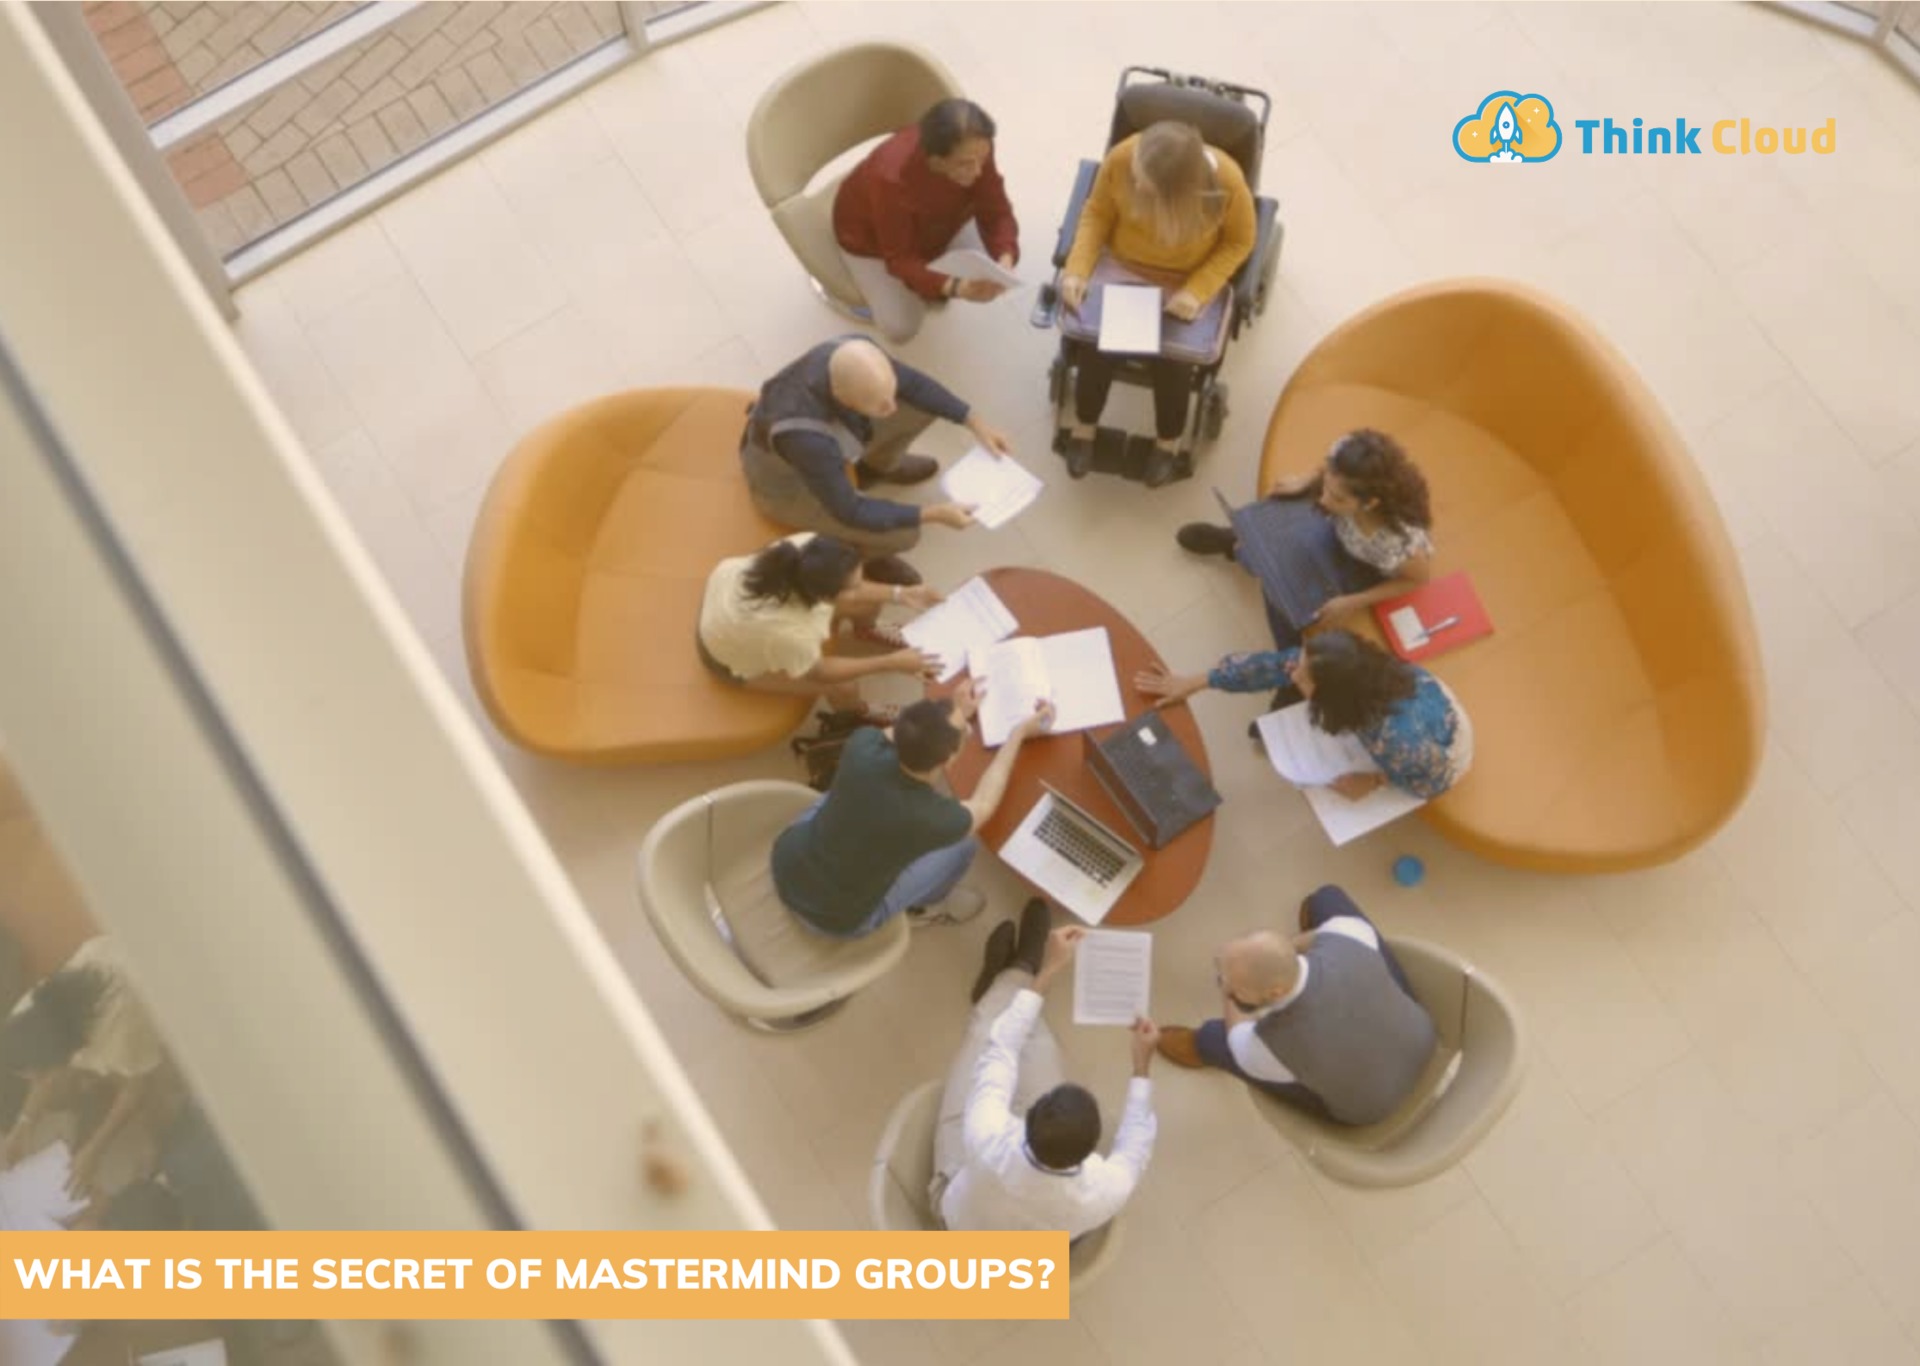 What is the secret of Mastermind Groups